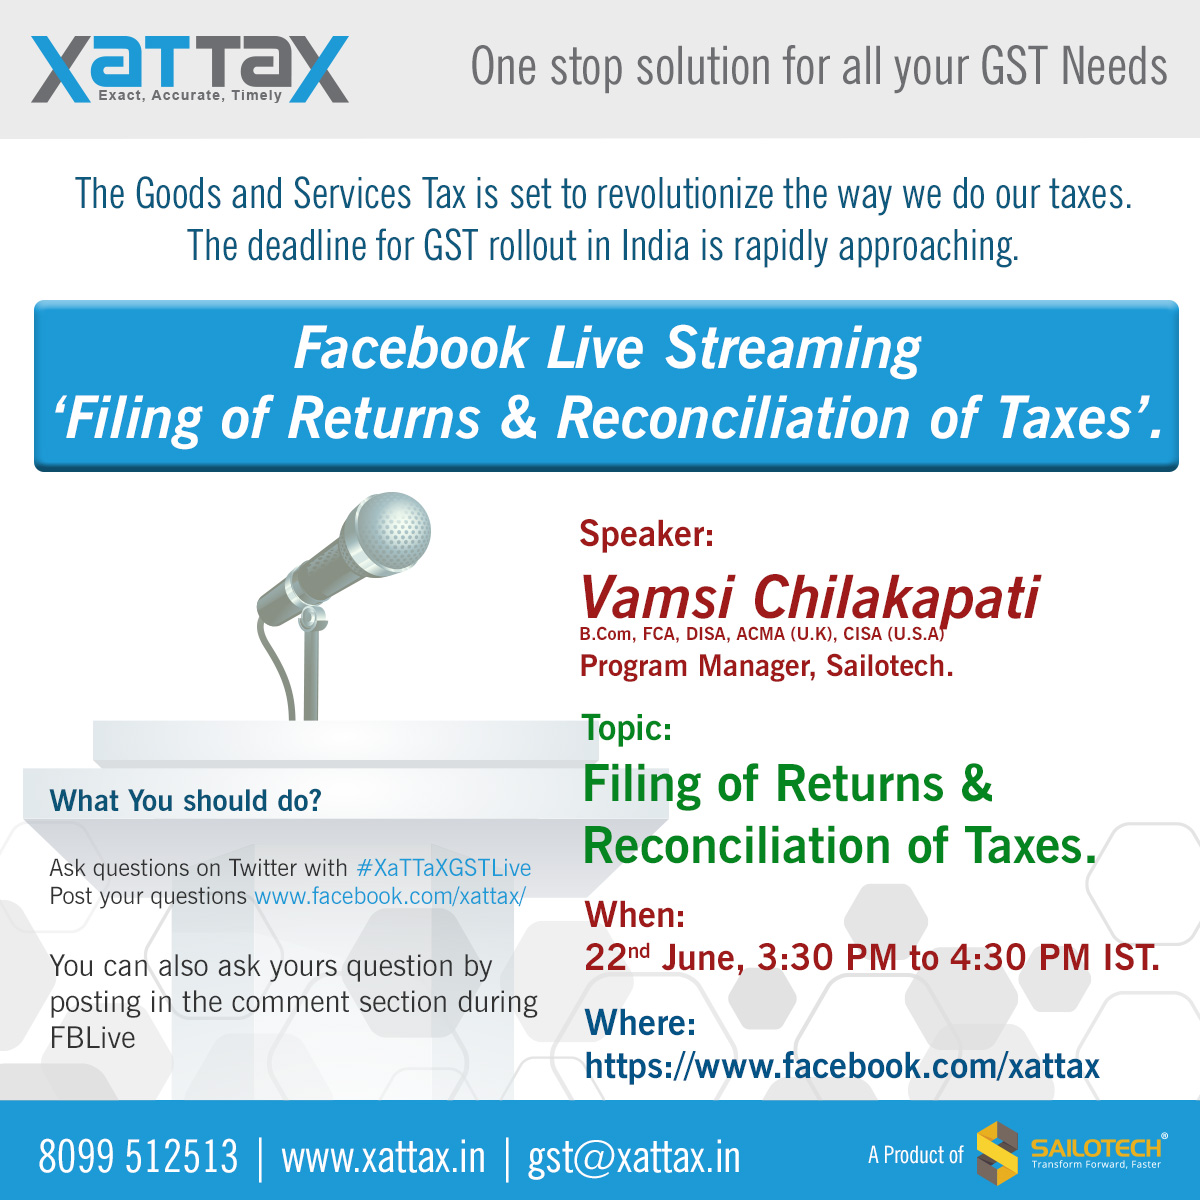 Facebook Live Streaming on 'Filing of Returns & Reconciliation of Taxes., Hyderabad, Telangana, India